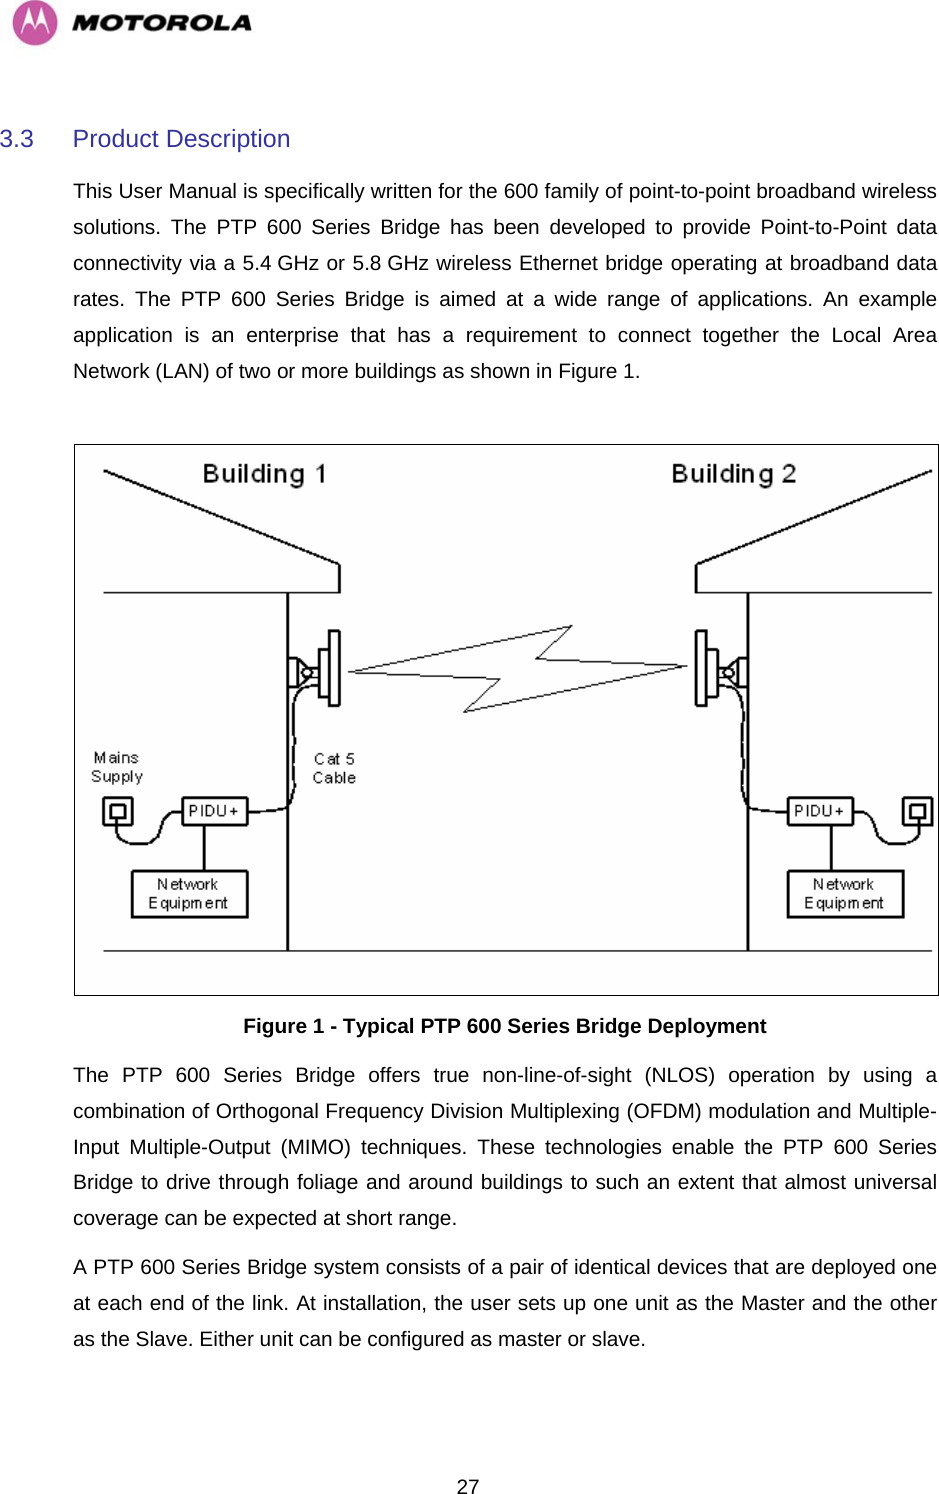   273.3 Product Description This User Manual is specifically written for the 600 family of point-to-point broadband wireless solutions. The PTP 600 Series Bridge has been developed to provide Point-to-Point data connectivity via a 5.4 GHz or 5.8 GHz wireless Ethernet bridge operating at broadband data rates. The PTP 600 Series Bridge is aimed at a wide range of applications. An example application is an enterprise that has a requirement to connect together the Local Area Network (LAN) of two or more buildings as shown in Figure 1.    Figure 1 - Typical PTP 600 Series Bridge Deployment The PTP 600 Series Bridge offers true non-line-of-sight (NLOS) operation by using a combination of Orthogonal Frequency Division Multiplexing (OFDM) modulation and Multiple-Input Multiple-Output (MIMO) techniques. These technologies enable the PTP 600 Series Bridge to drive through foliage and around buildings to such an extent that almost universal coverage can be expected at short range.  A PTP 600 Series Bridge system consists of a pair of identical devices that are deployed one at each end of the link. At installation, the user sets up one unit as the Master and the other as the Slave. Either unit can be configured as master or slave.  